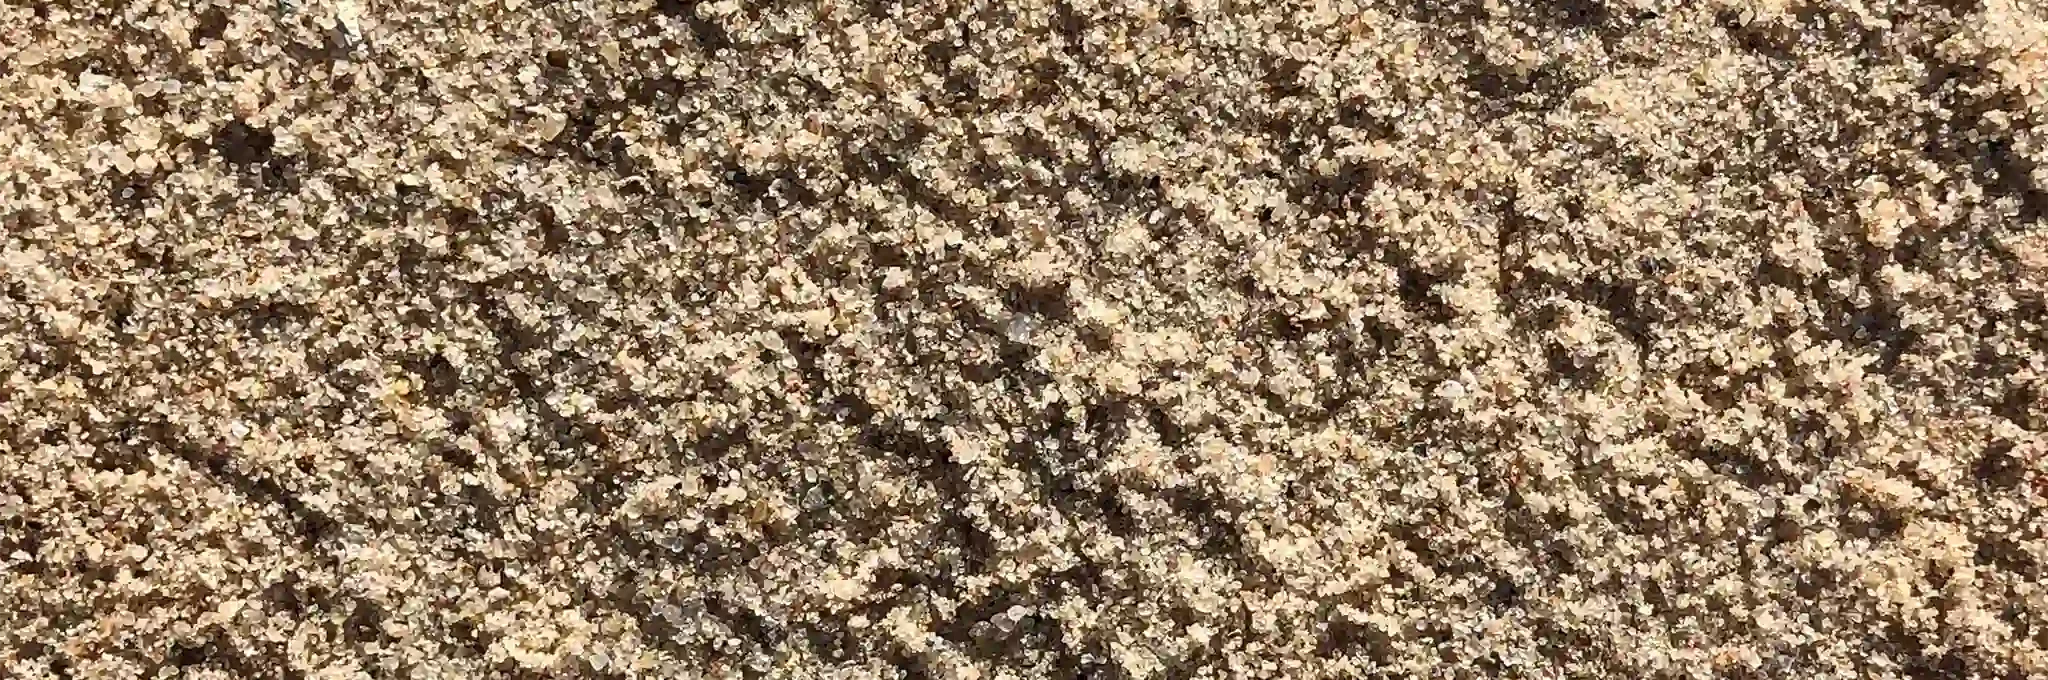 A close-up view of Bells Savoy topdressing sand.